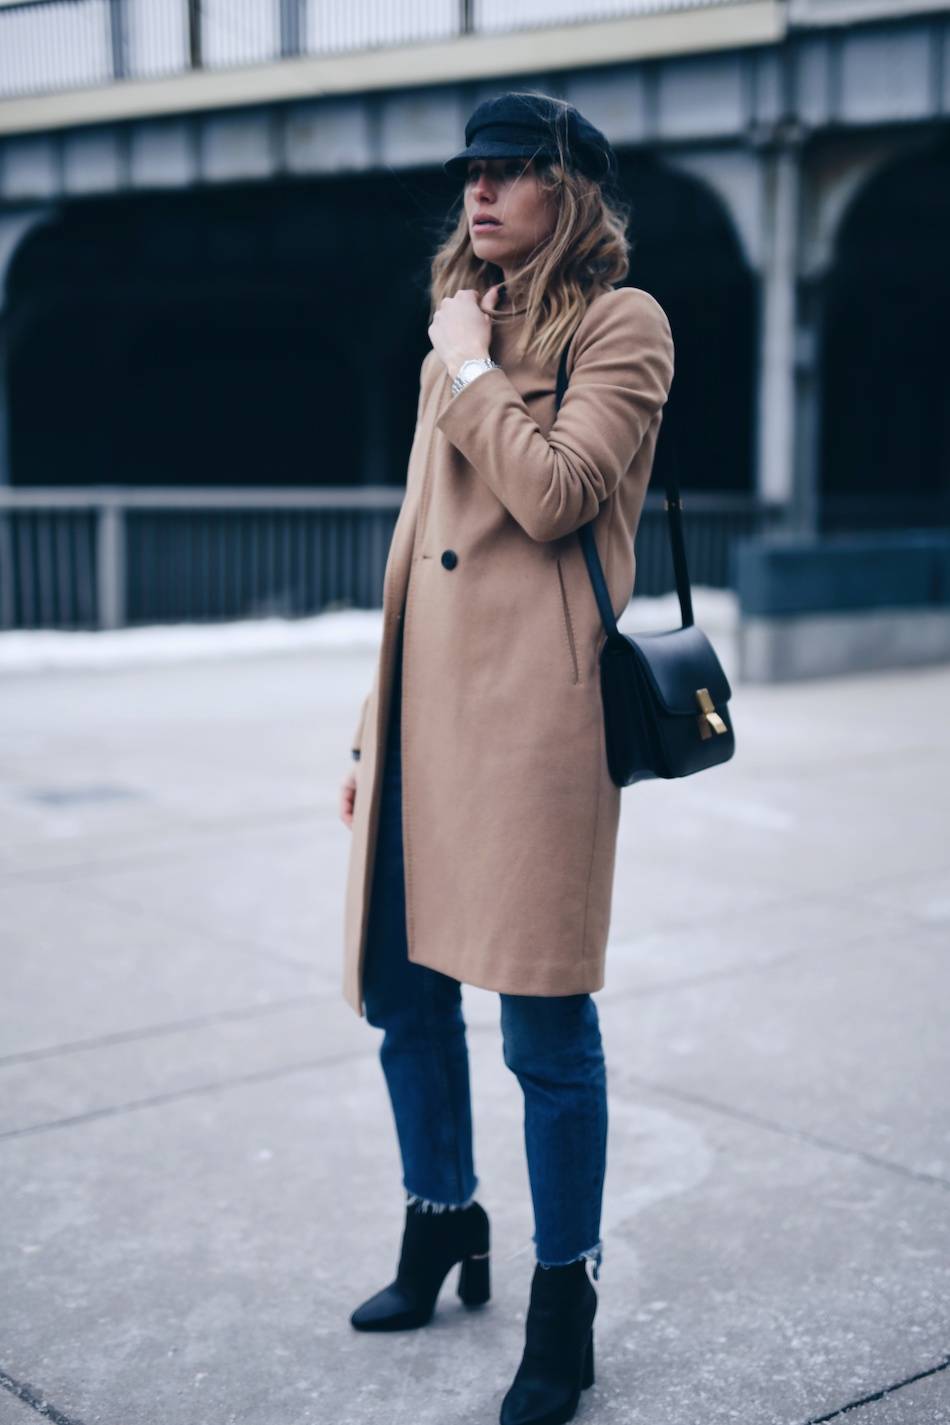 Style and beauty blogger Jill Lansky of The August Diaries Isabel marant Eva newsboy cap, camel coat, jeans, French style, how to dress like a Parisian, tag heuer watch